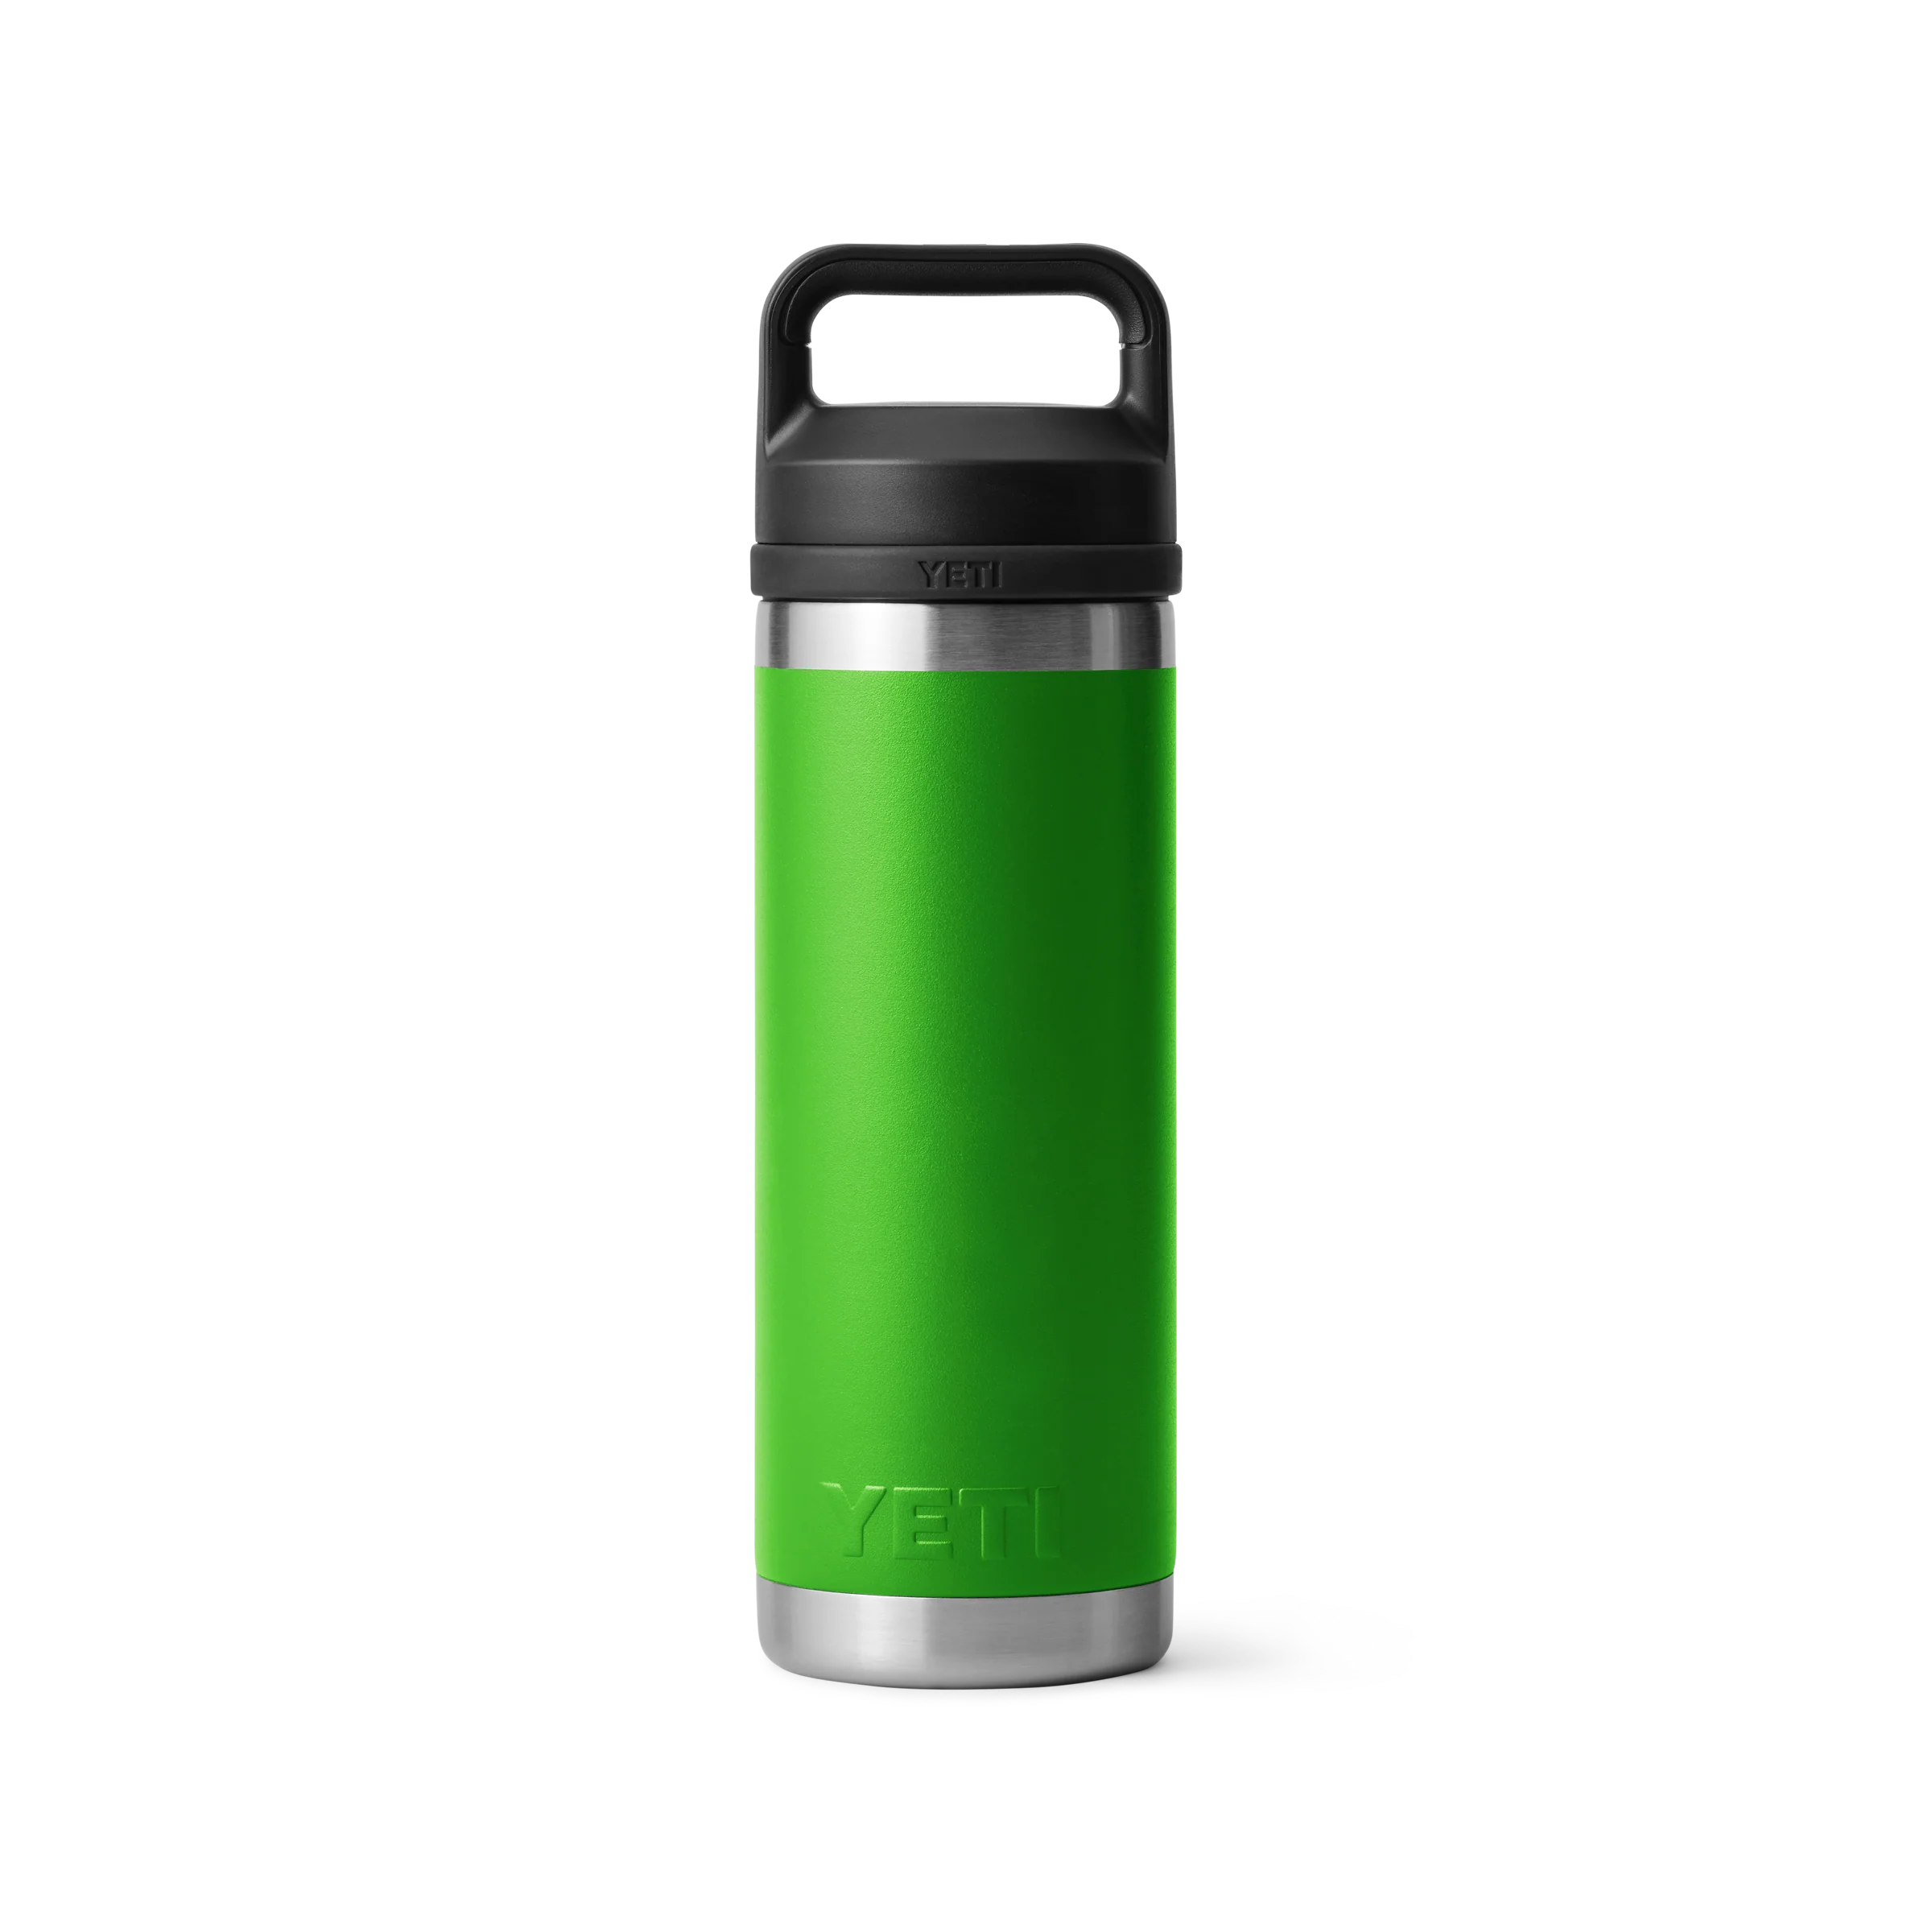 A YETI Rambler 18 oz Bottle with a Chug cap. In limited edition color: Canopy Green.